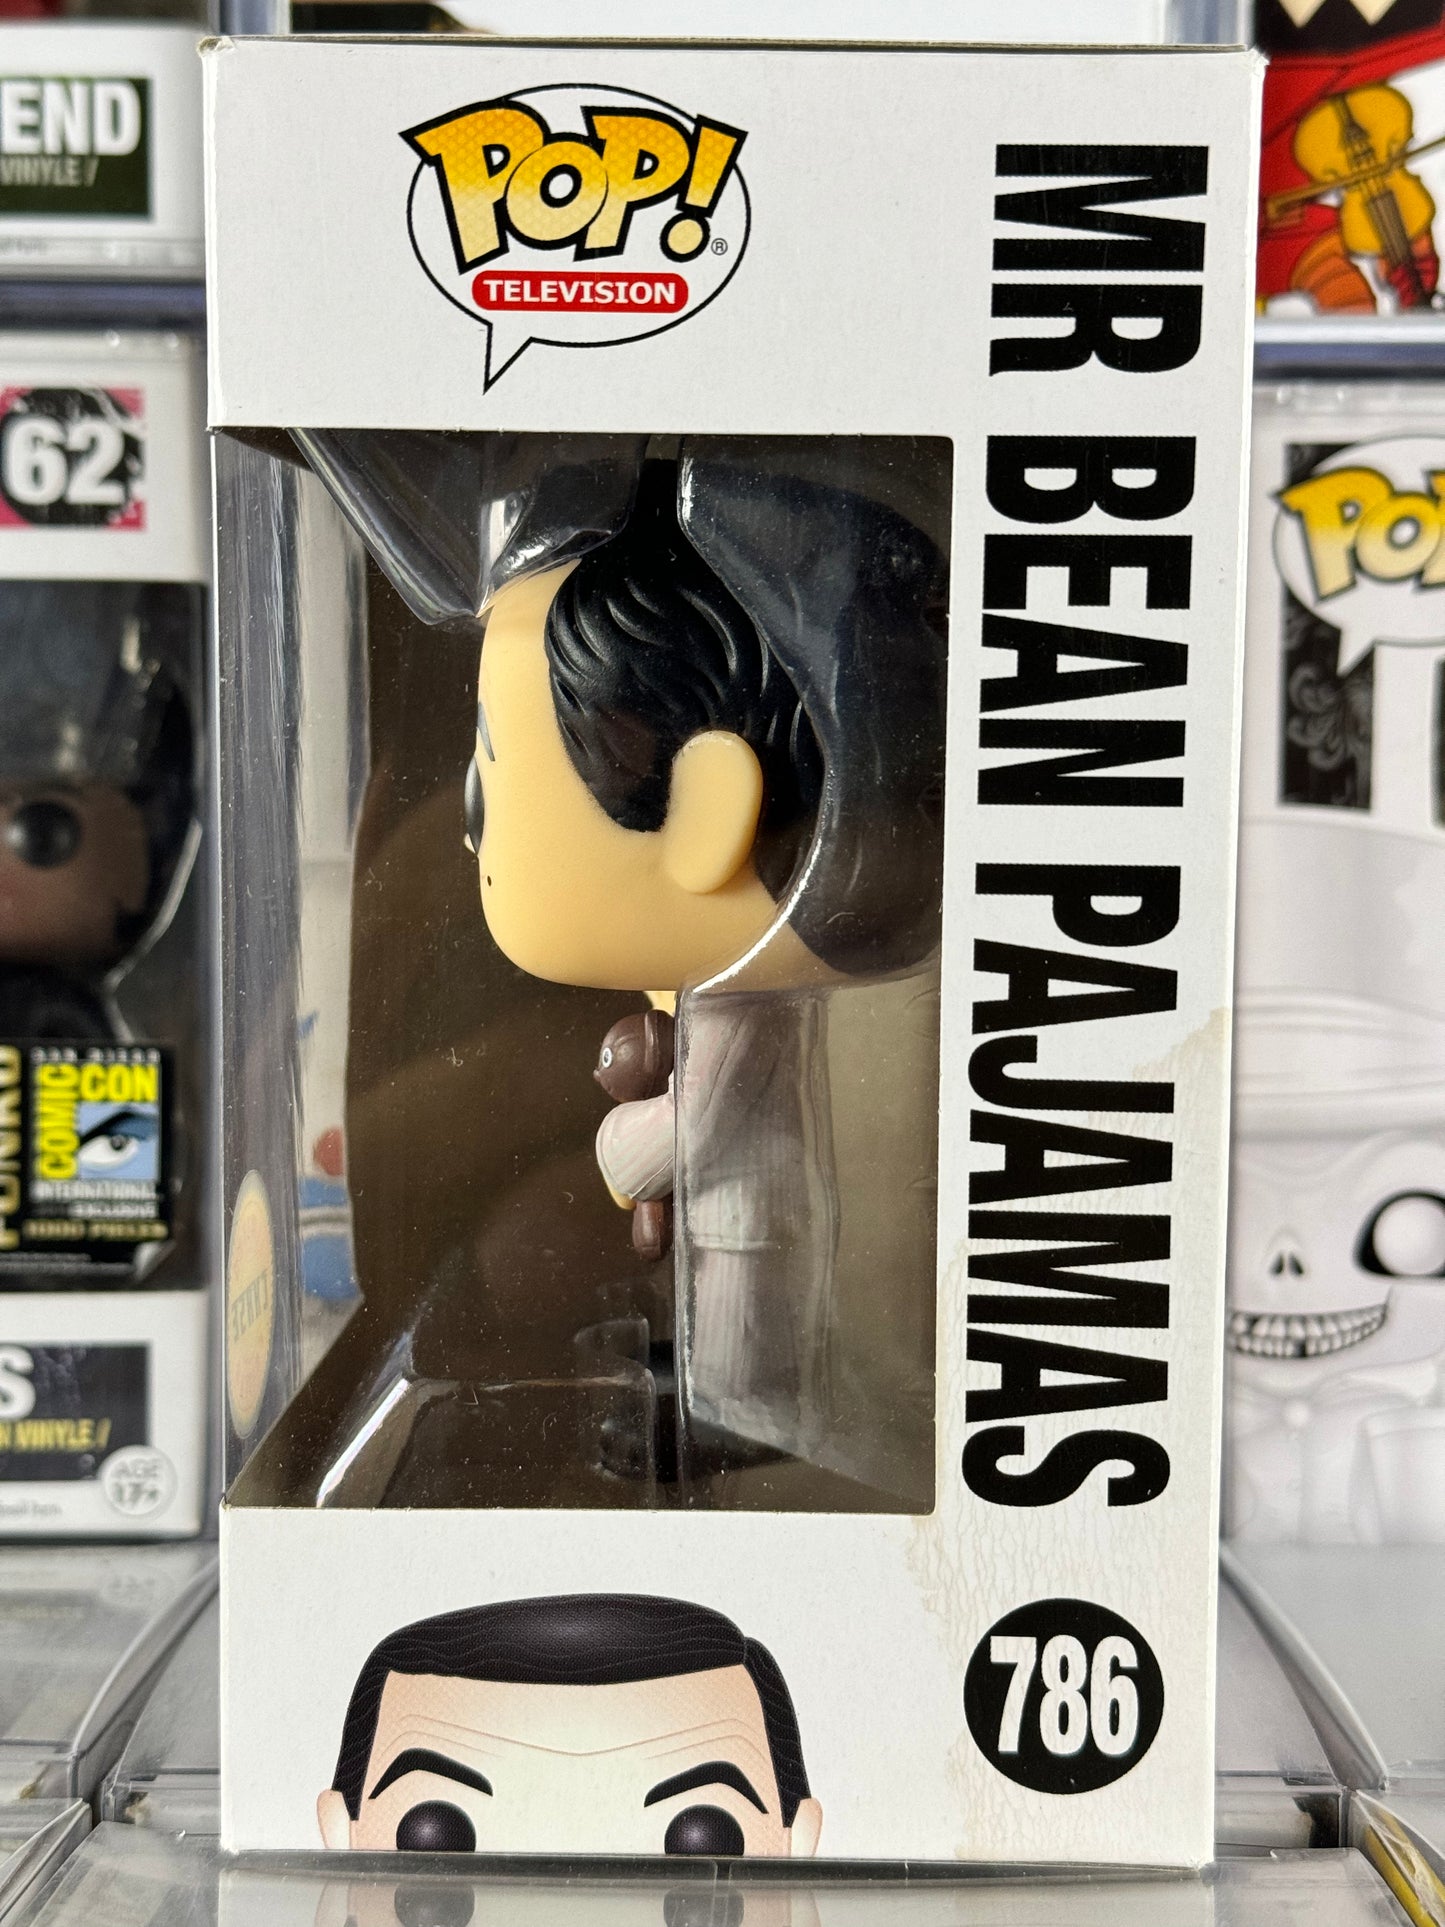 Mr. Bean - Mr. Bean in Pajamas (786) Vaulted CHASE